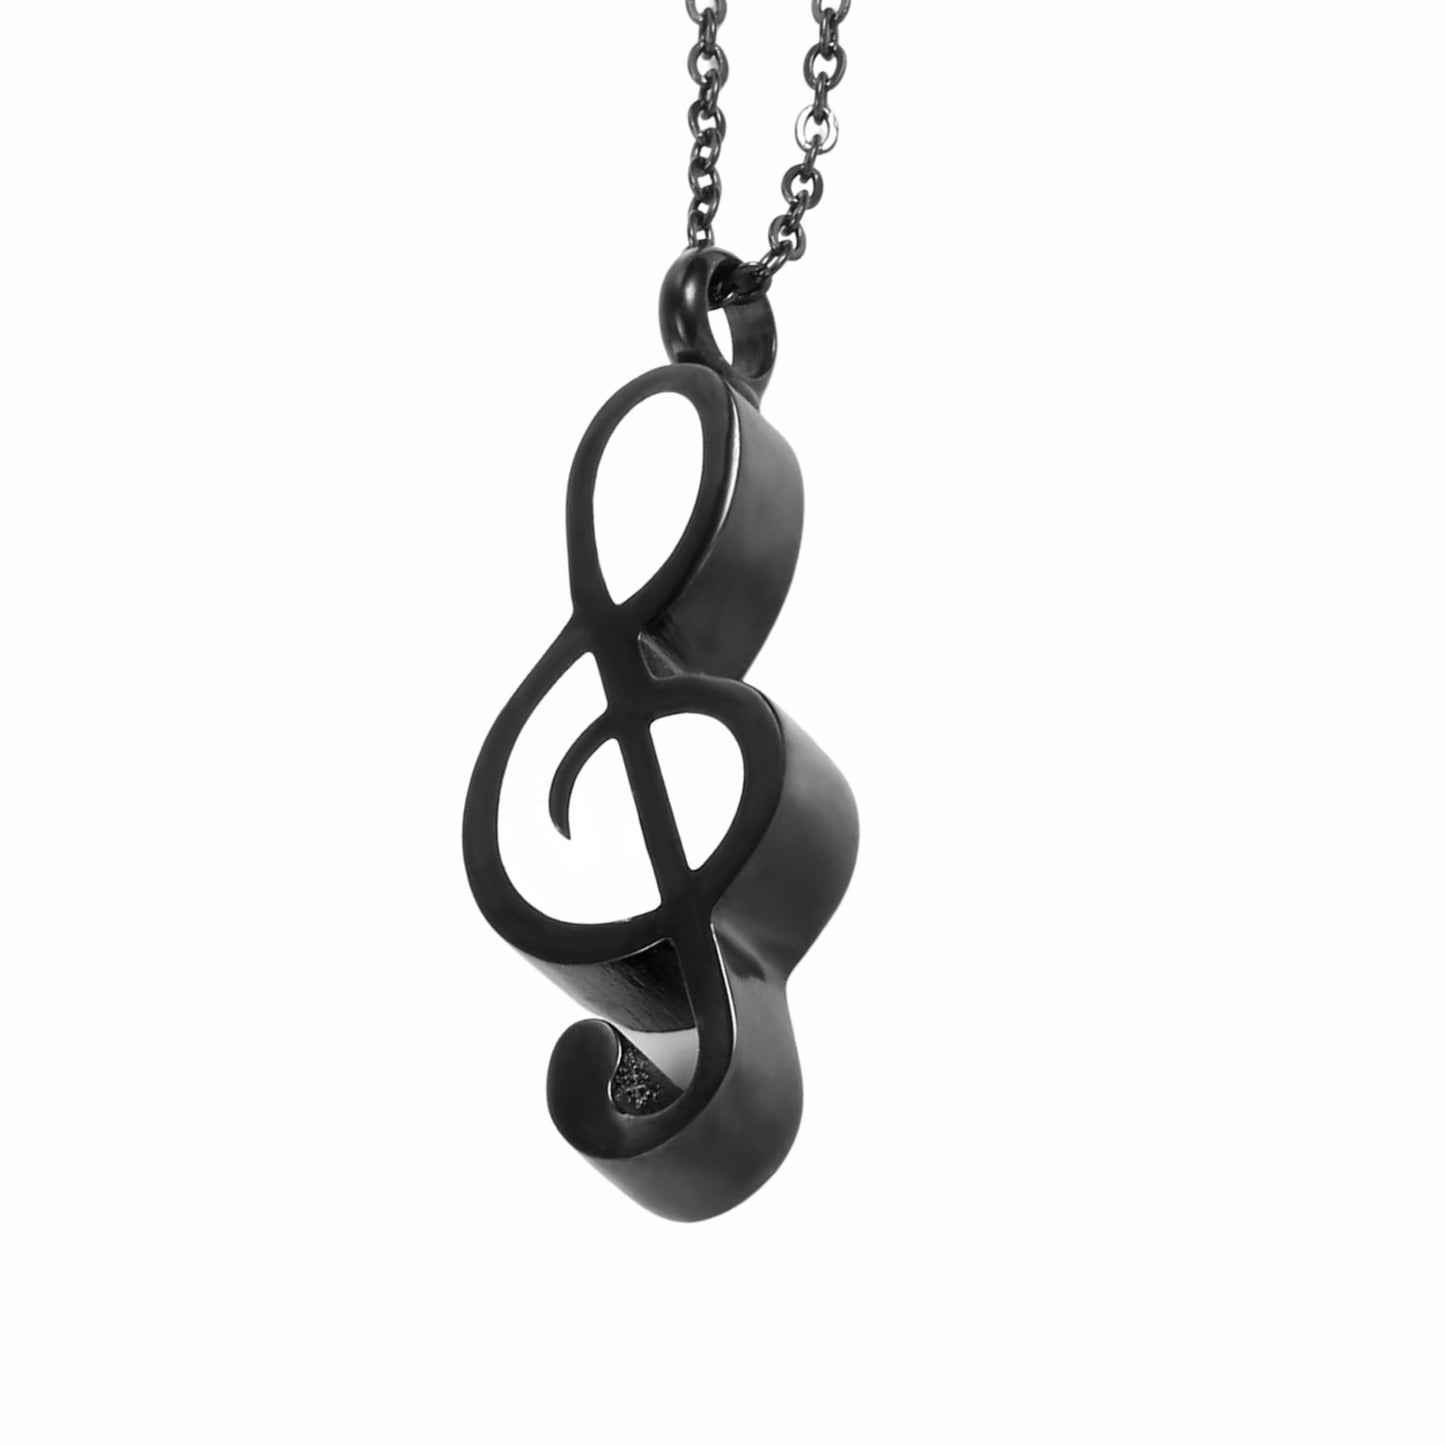 Music Note URN Necklace, Stainless Steel Cremation Memorial Keepsake Pendant Jewelry for Ashes (Funnel & Pin included) (Black + White, 1)